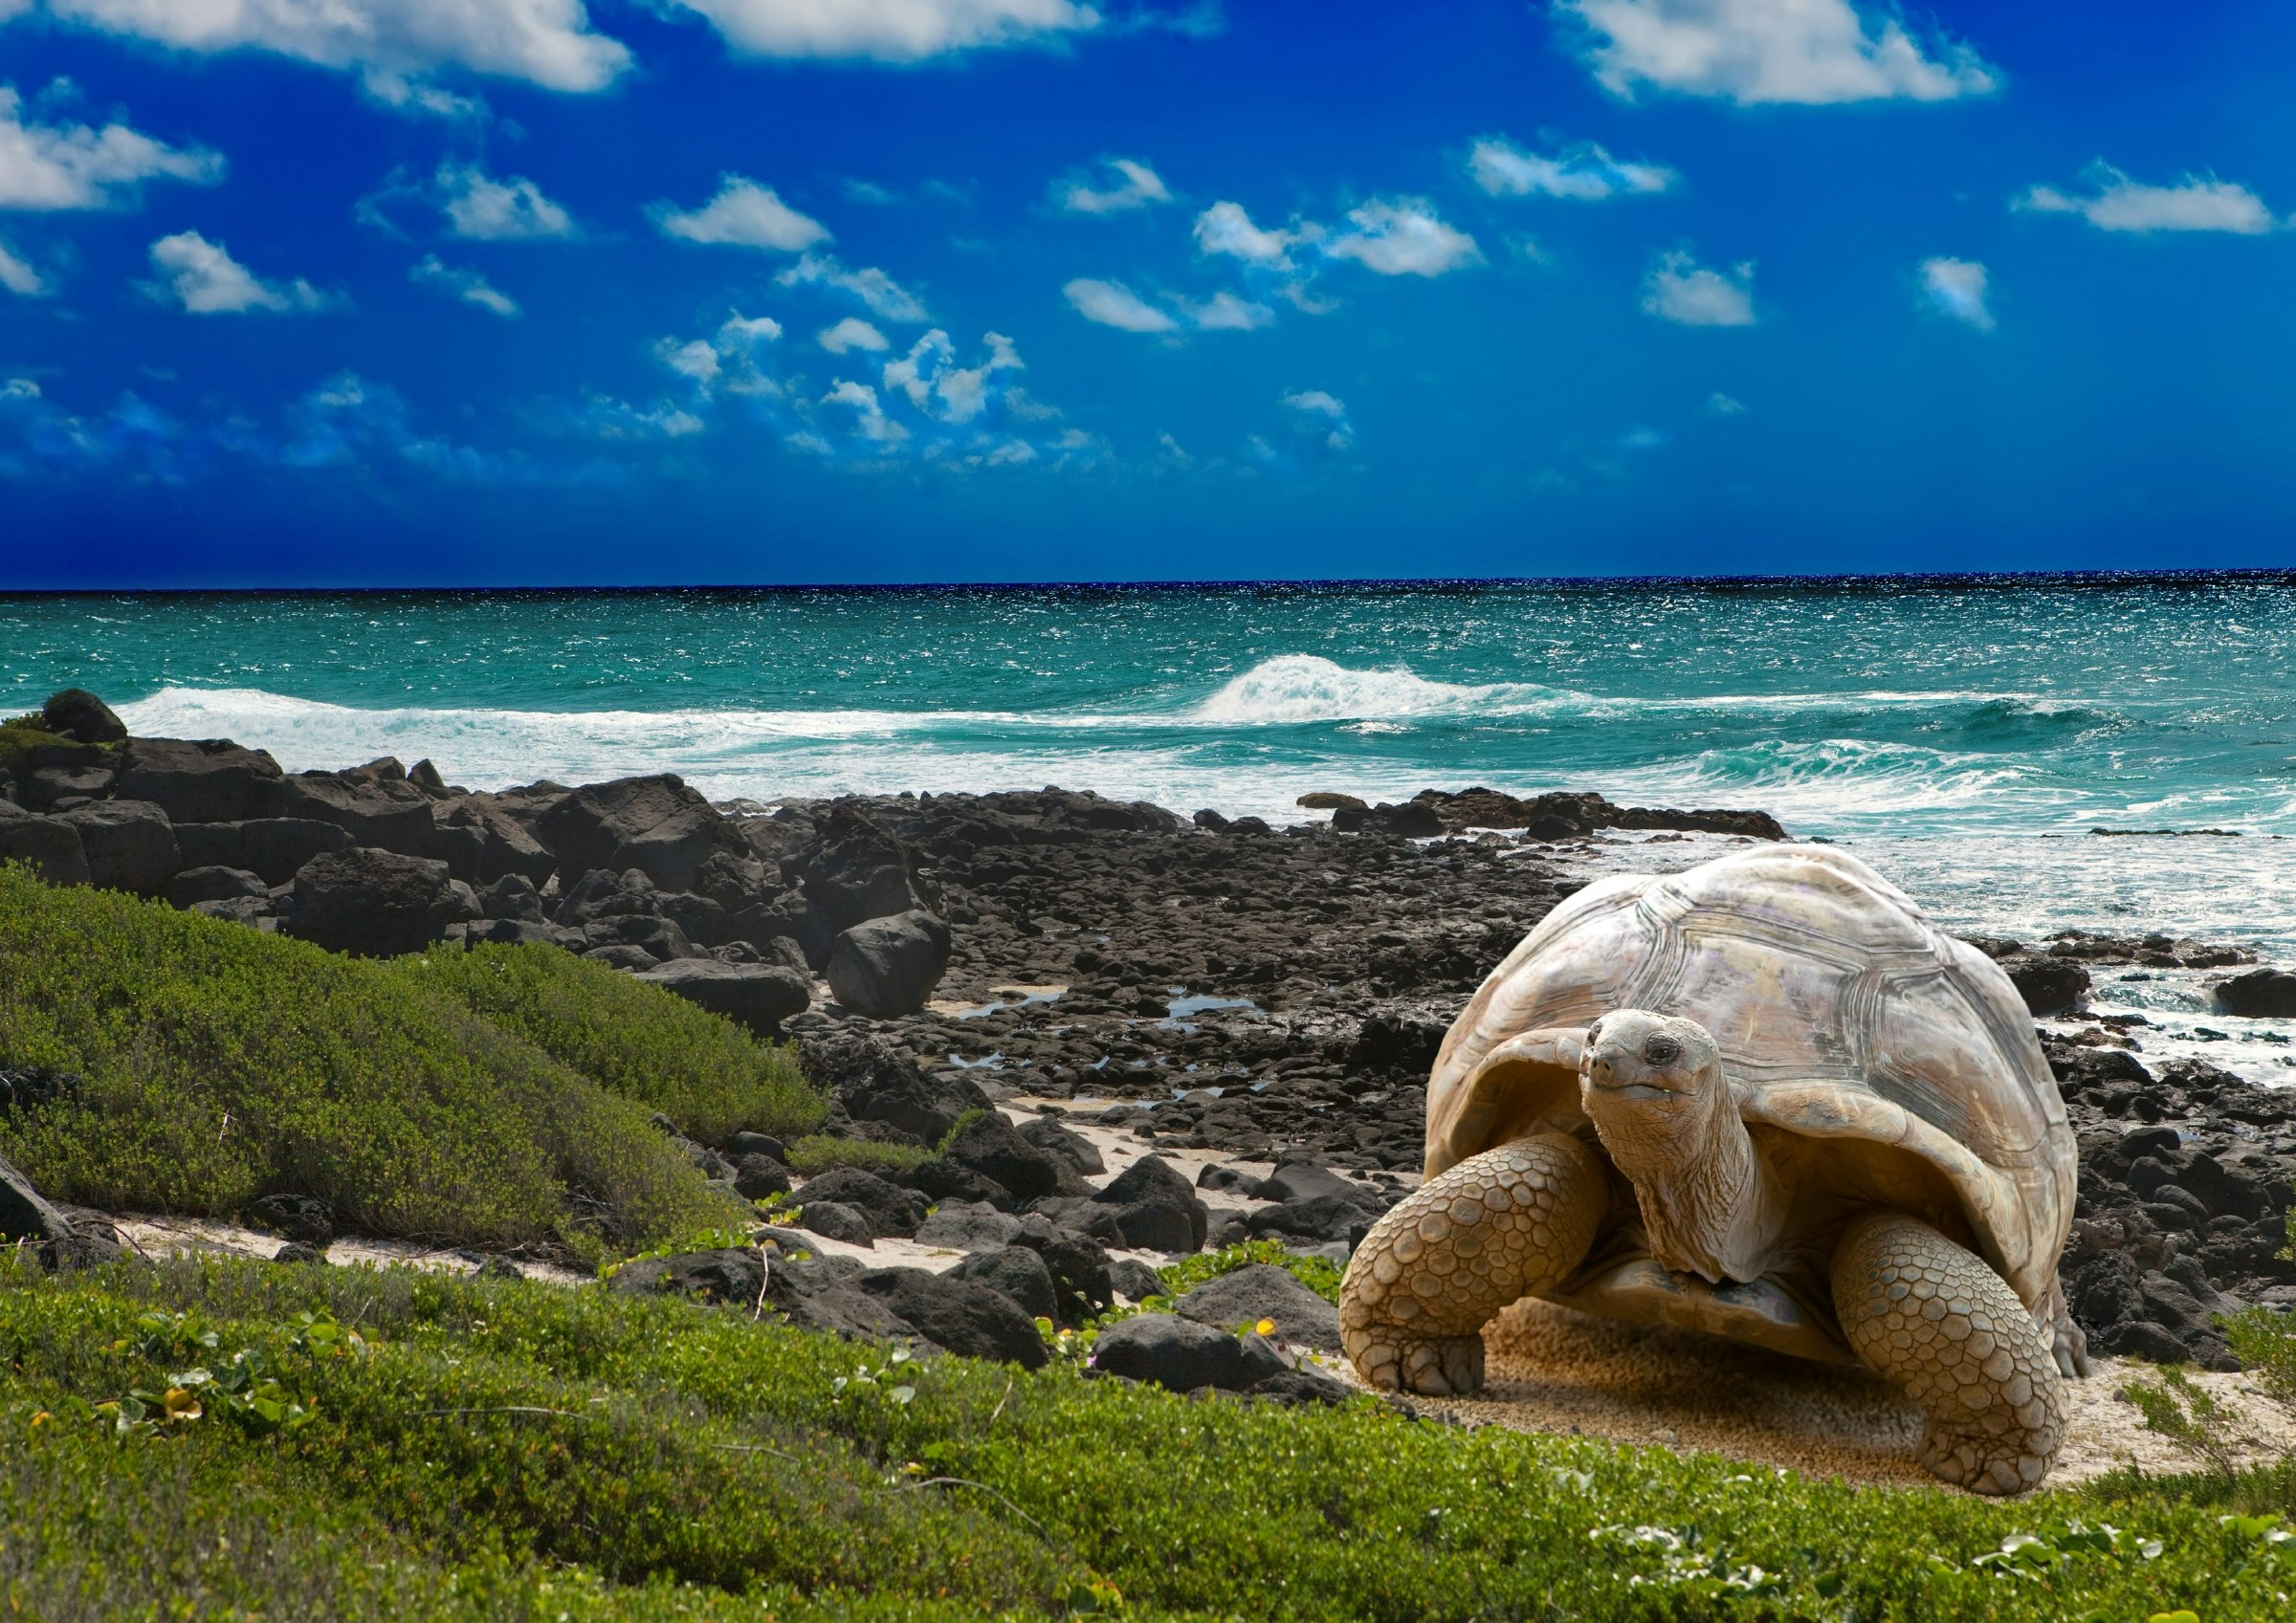 A giant turtle standing on a grassy hill with the beach 